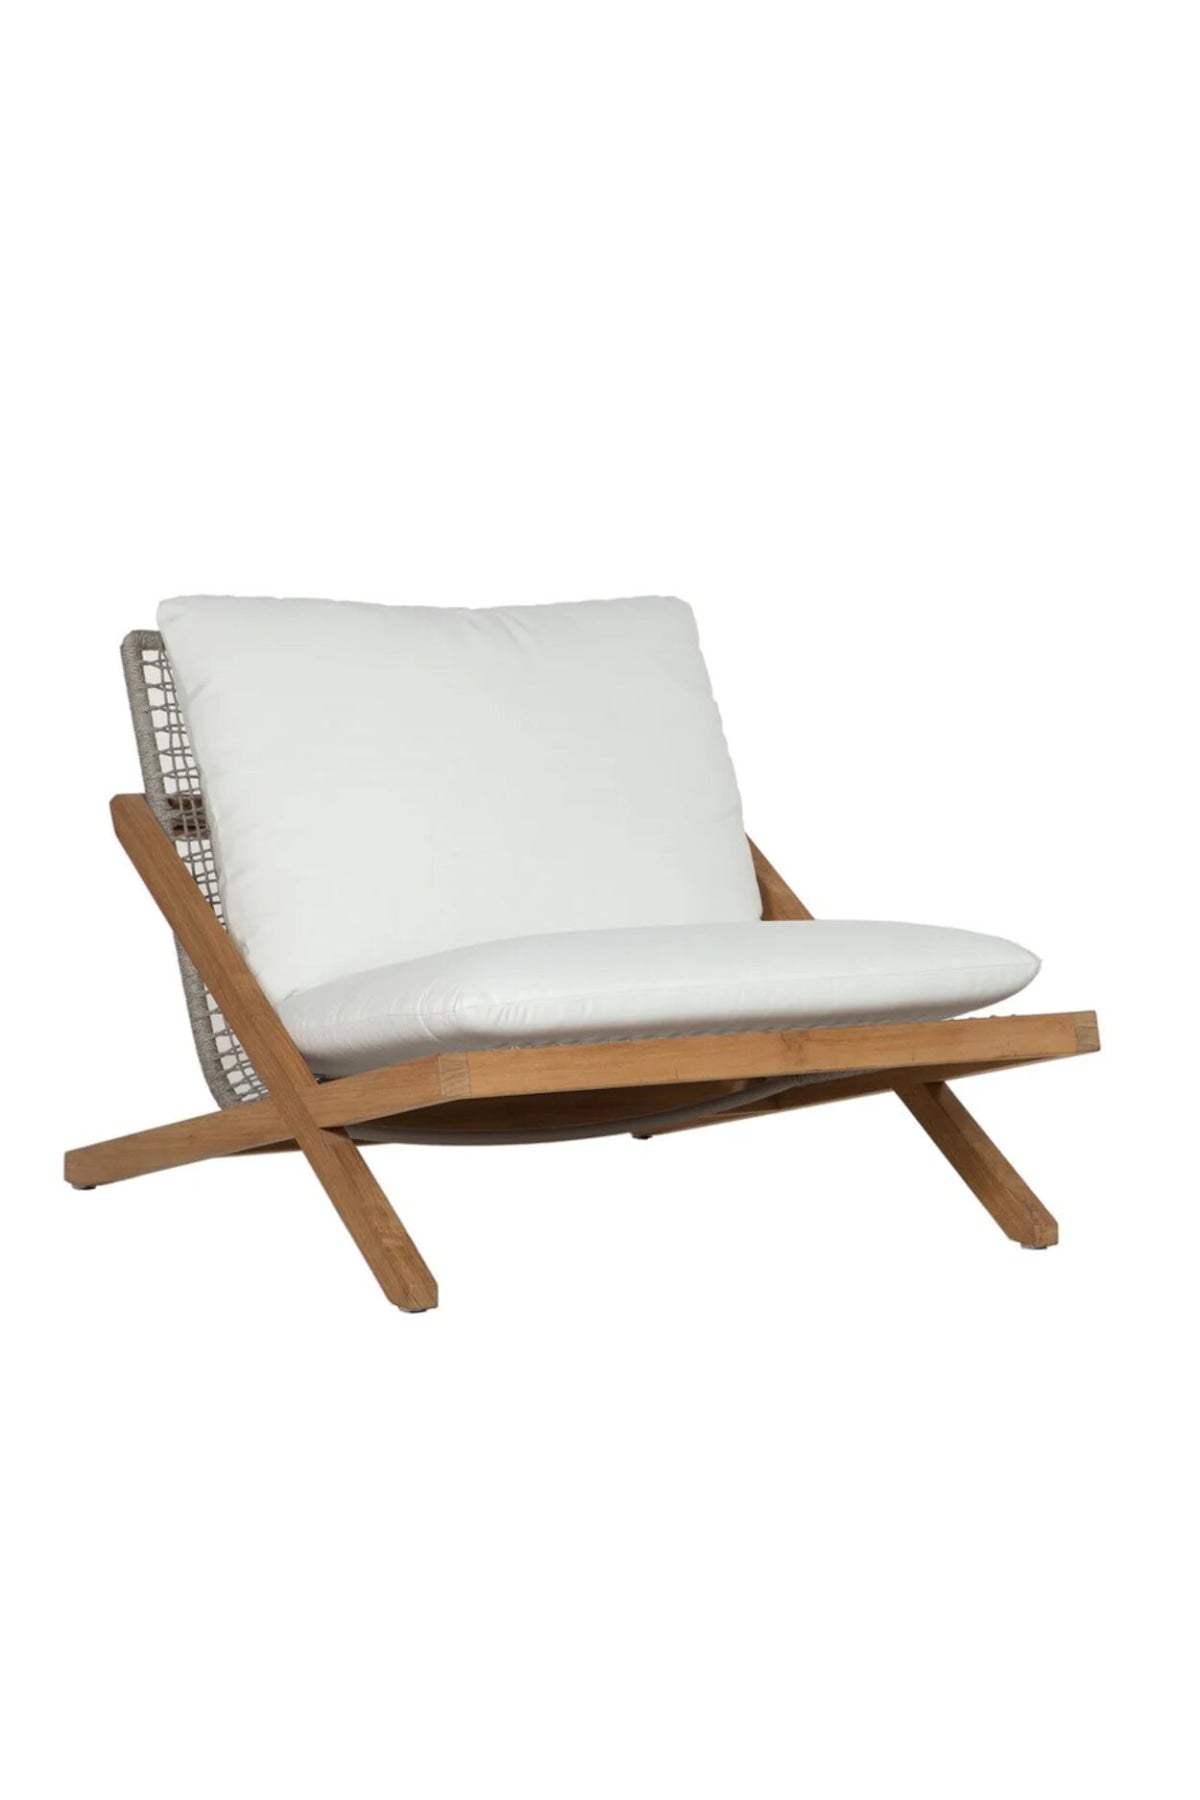 Venice Outdoor Lounge Chair - Natural